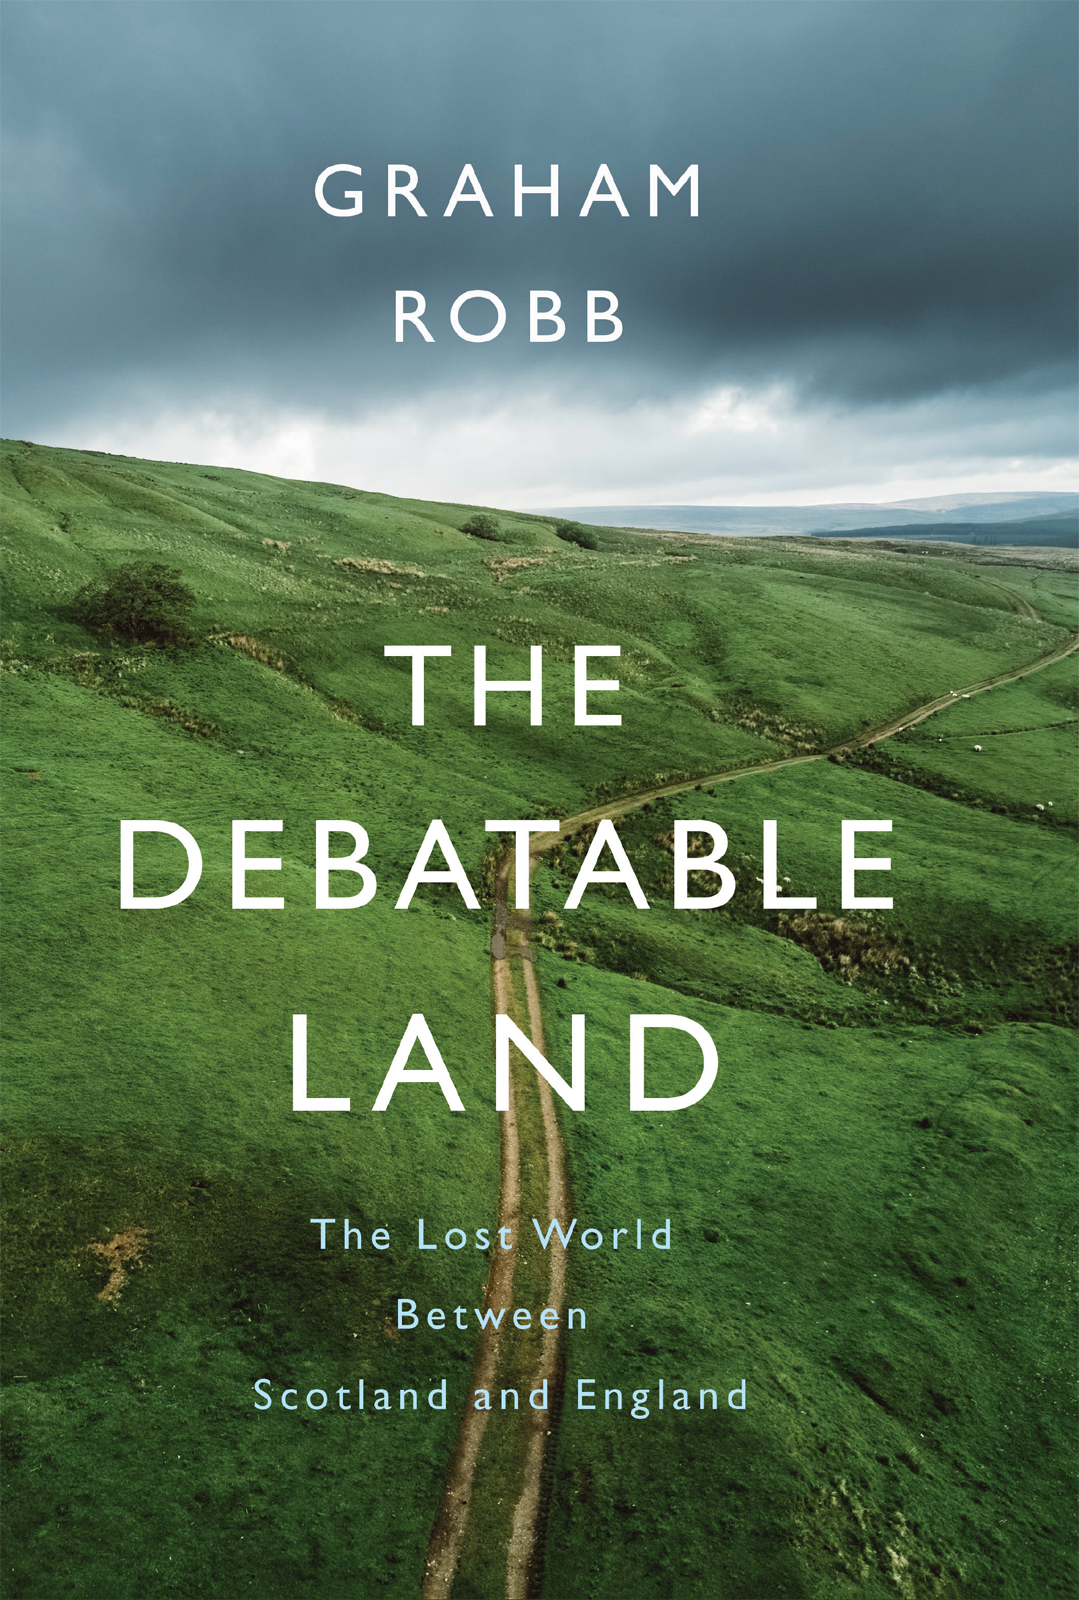 GRAHAM ROBB THE DEBATABLE LAND The Lost World Between Scotland and England - photo 1